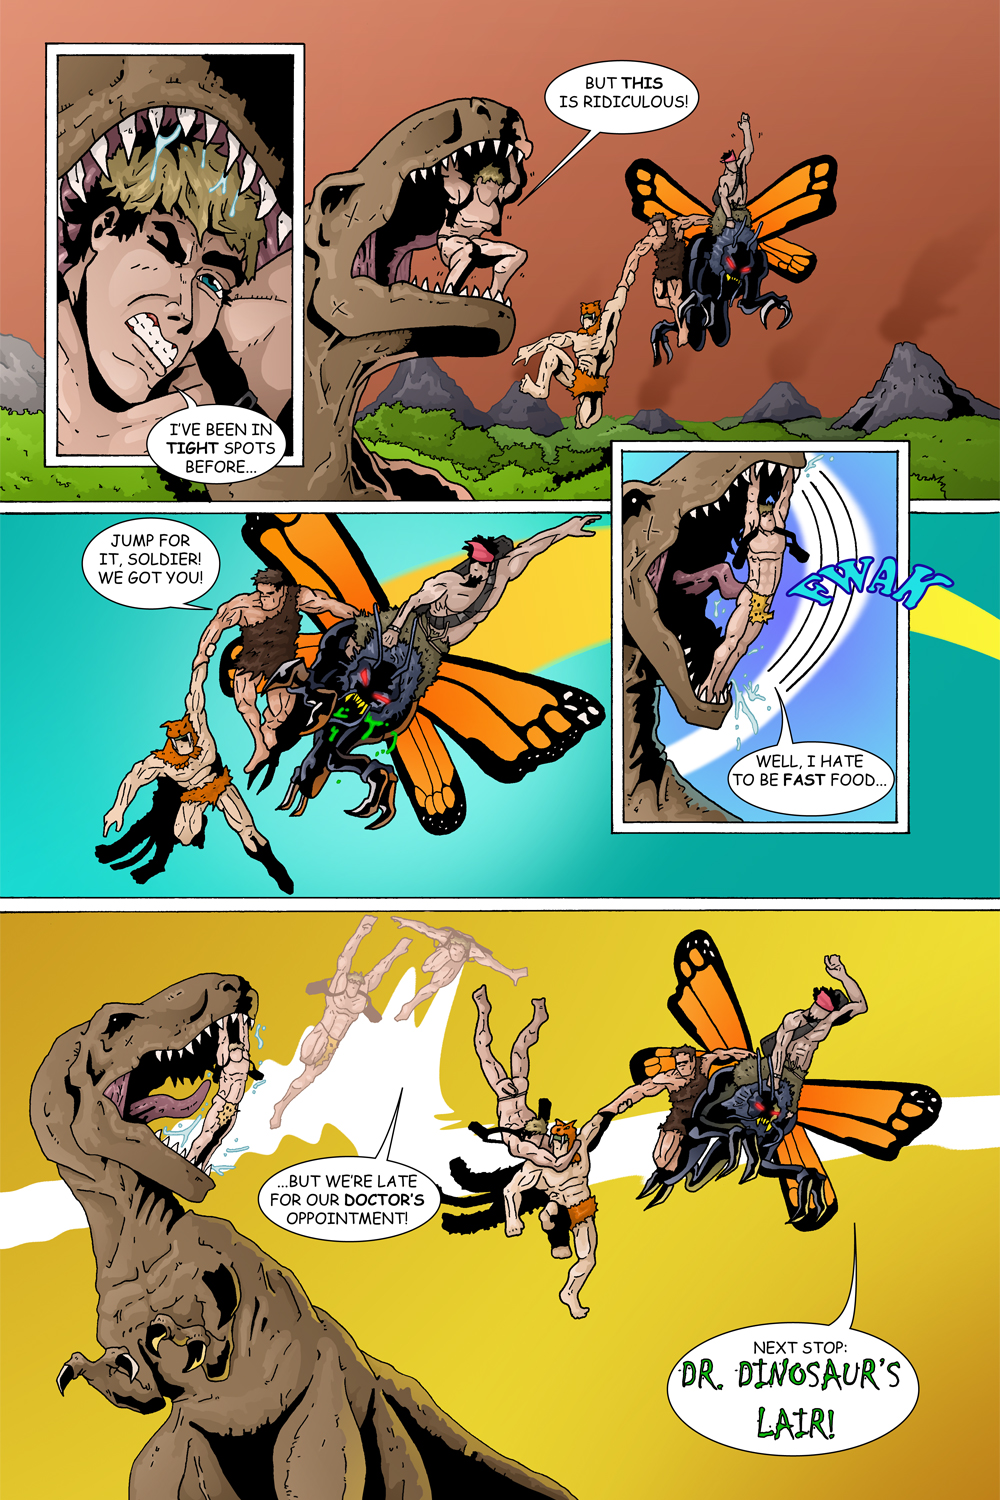 MISSION 003: PAGE 21 “THIS IS RIDICULOUS!”